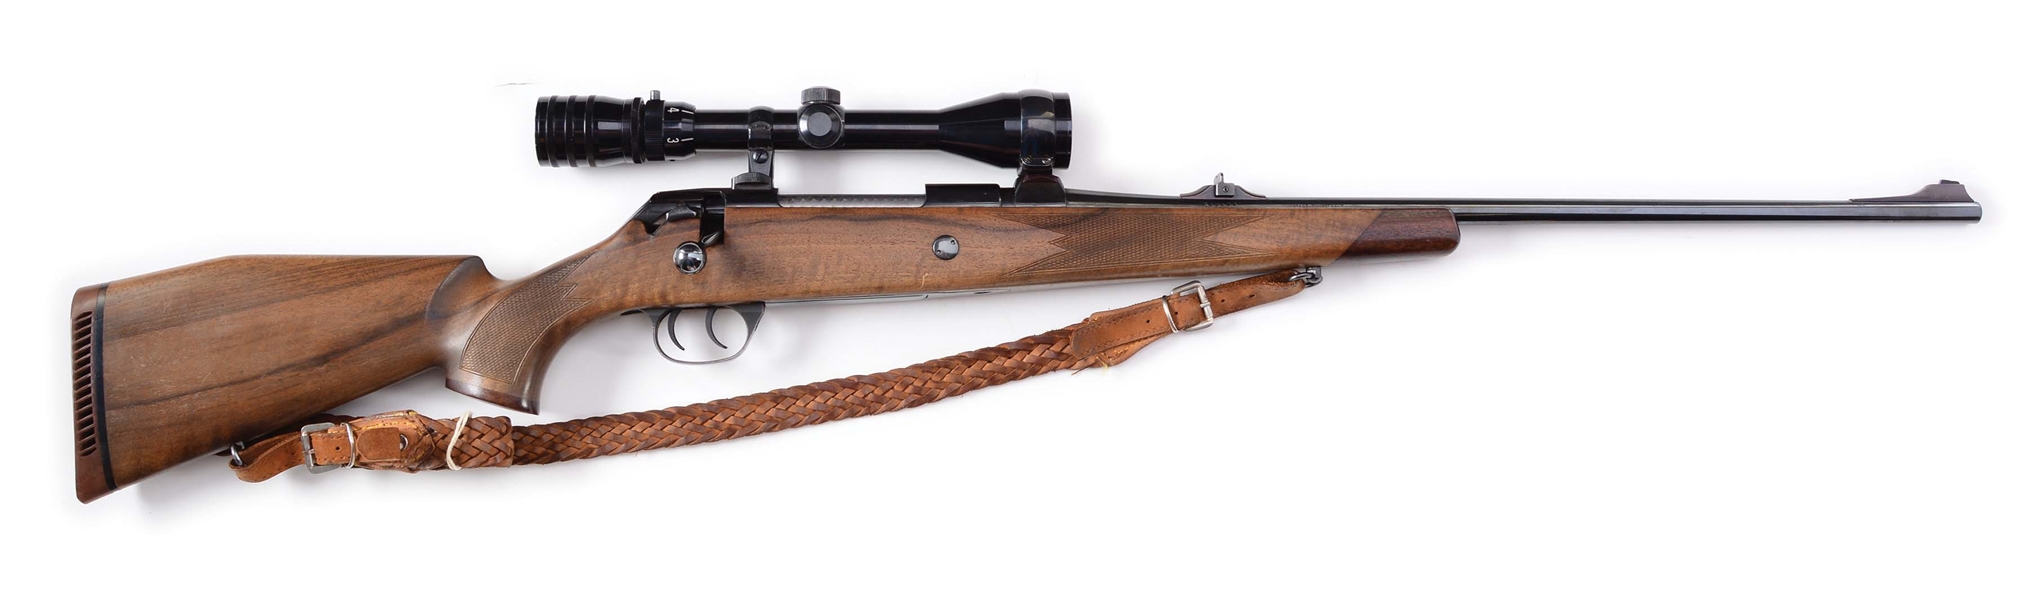 (M) VOERE TITAN II BOLT ACTION RIFLE WITH SCOPE.